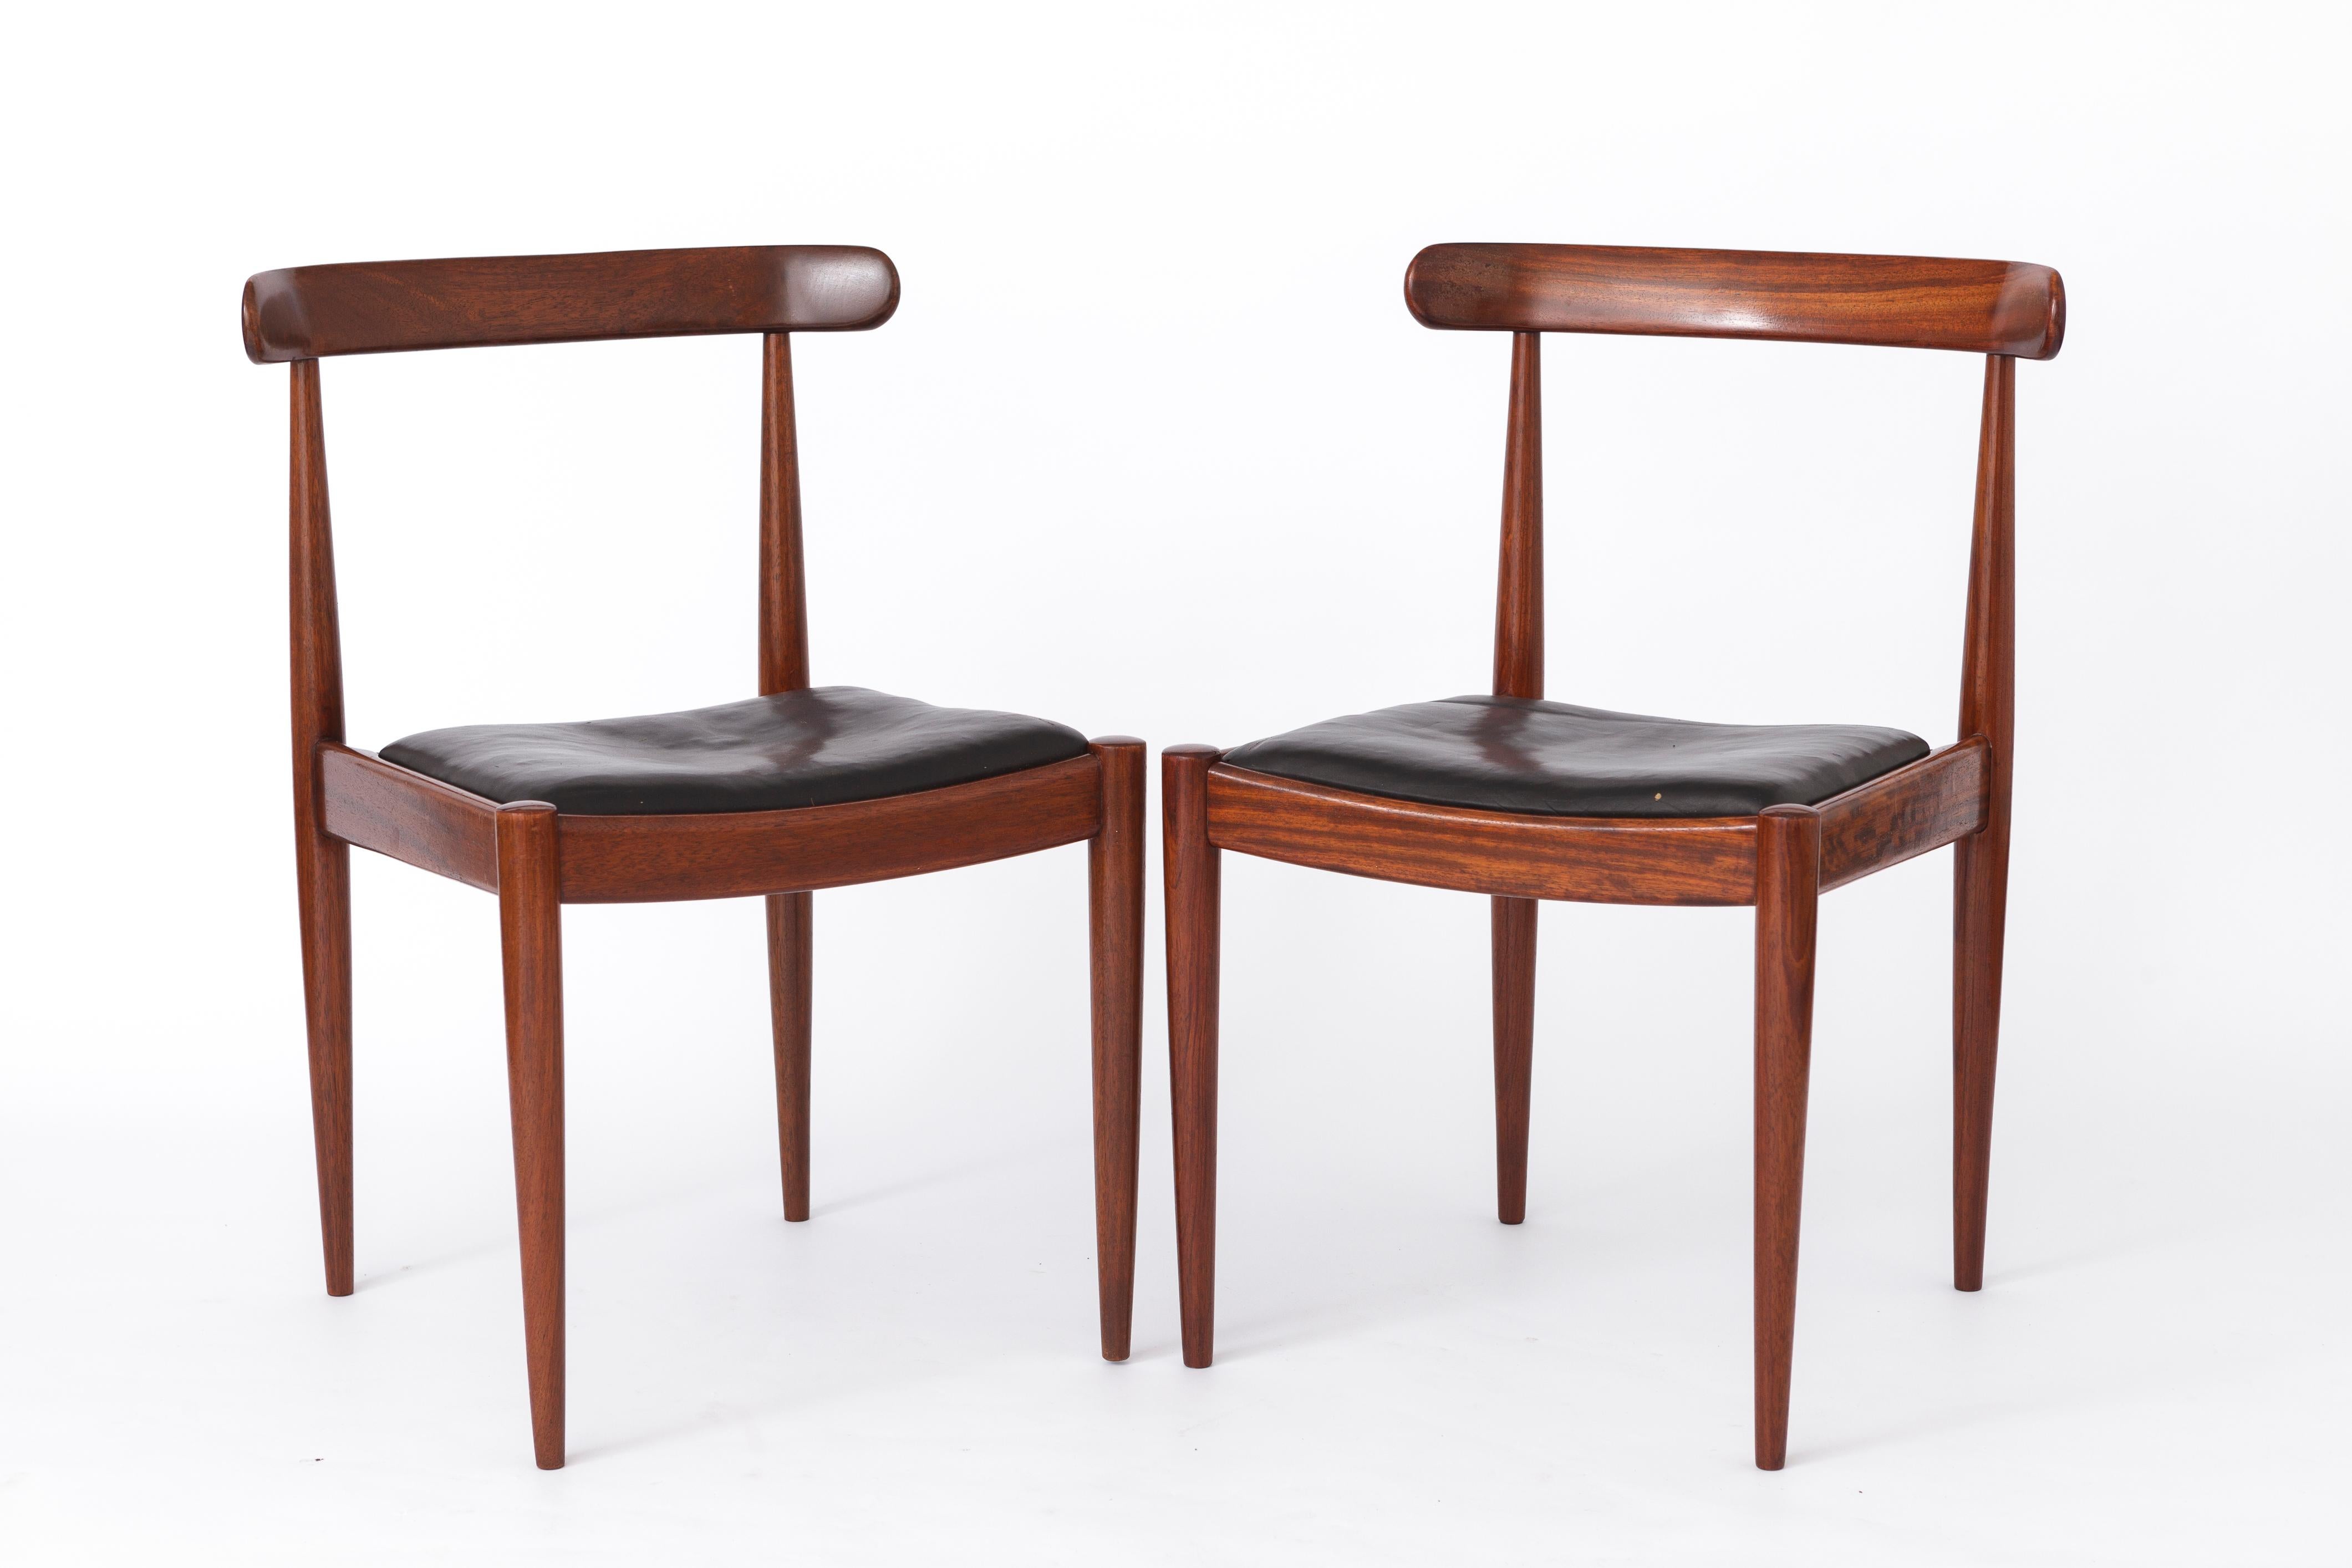 2 of totally a set of 6 rosewood chairs by Belgian designer Alfred Hendrickx for Belform. 
Modell: 500 from the 1960s. 
Displayed price is for a pair. Totally it's possible to purchase 2, 4 or 6 chairs. 

Sturdy rosewood chair frames. Refurbished